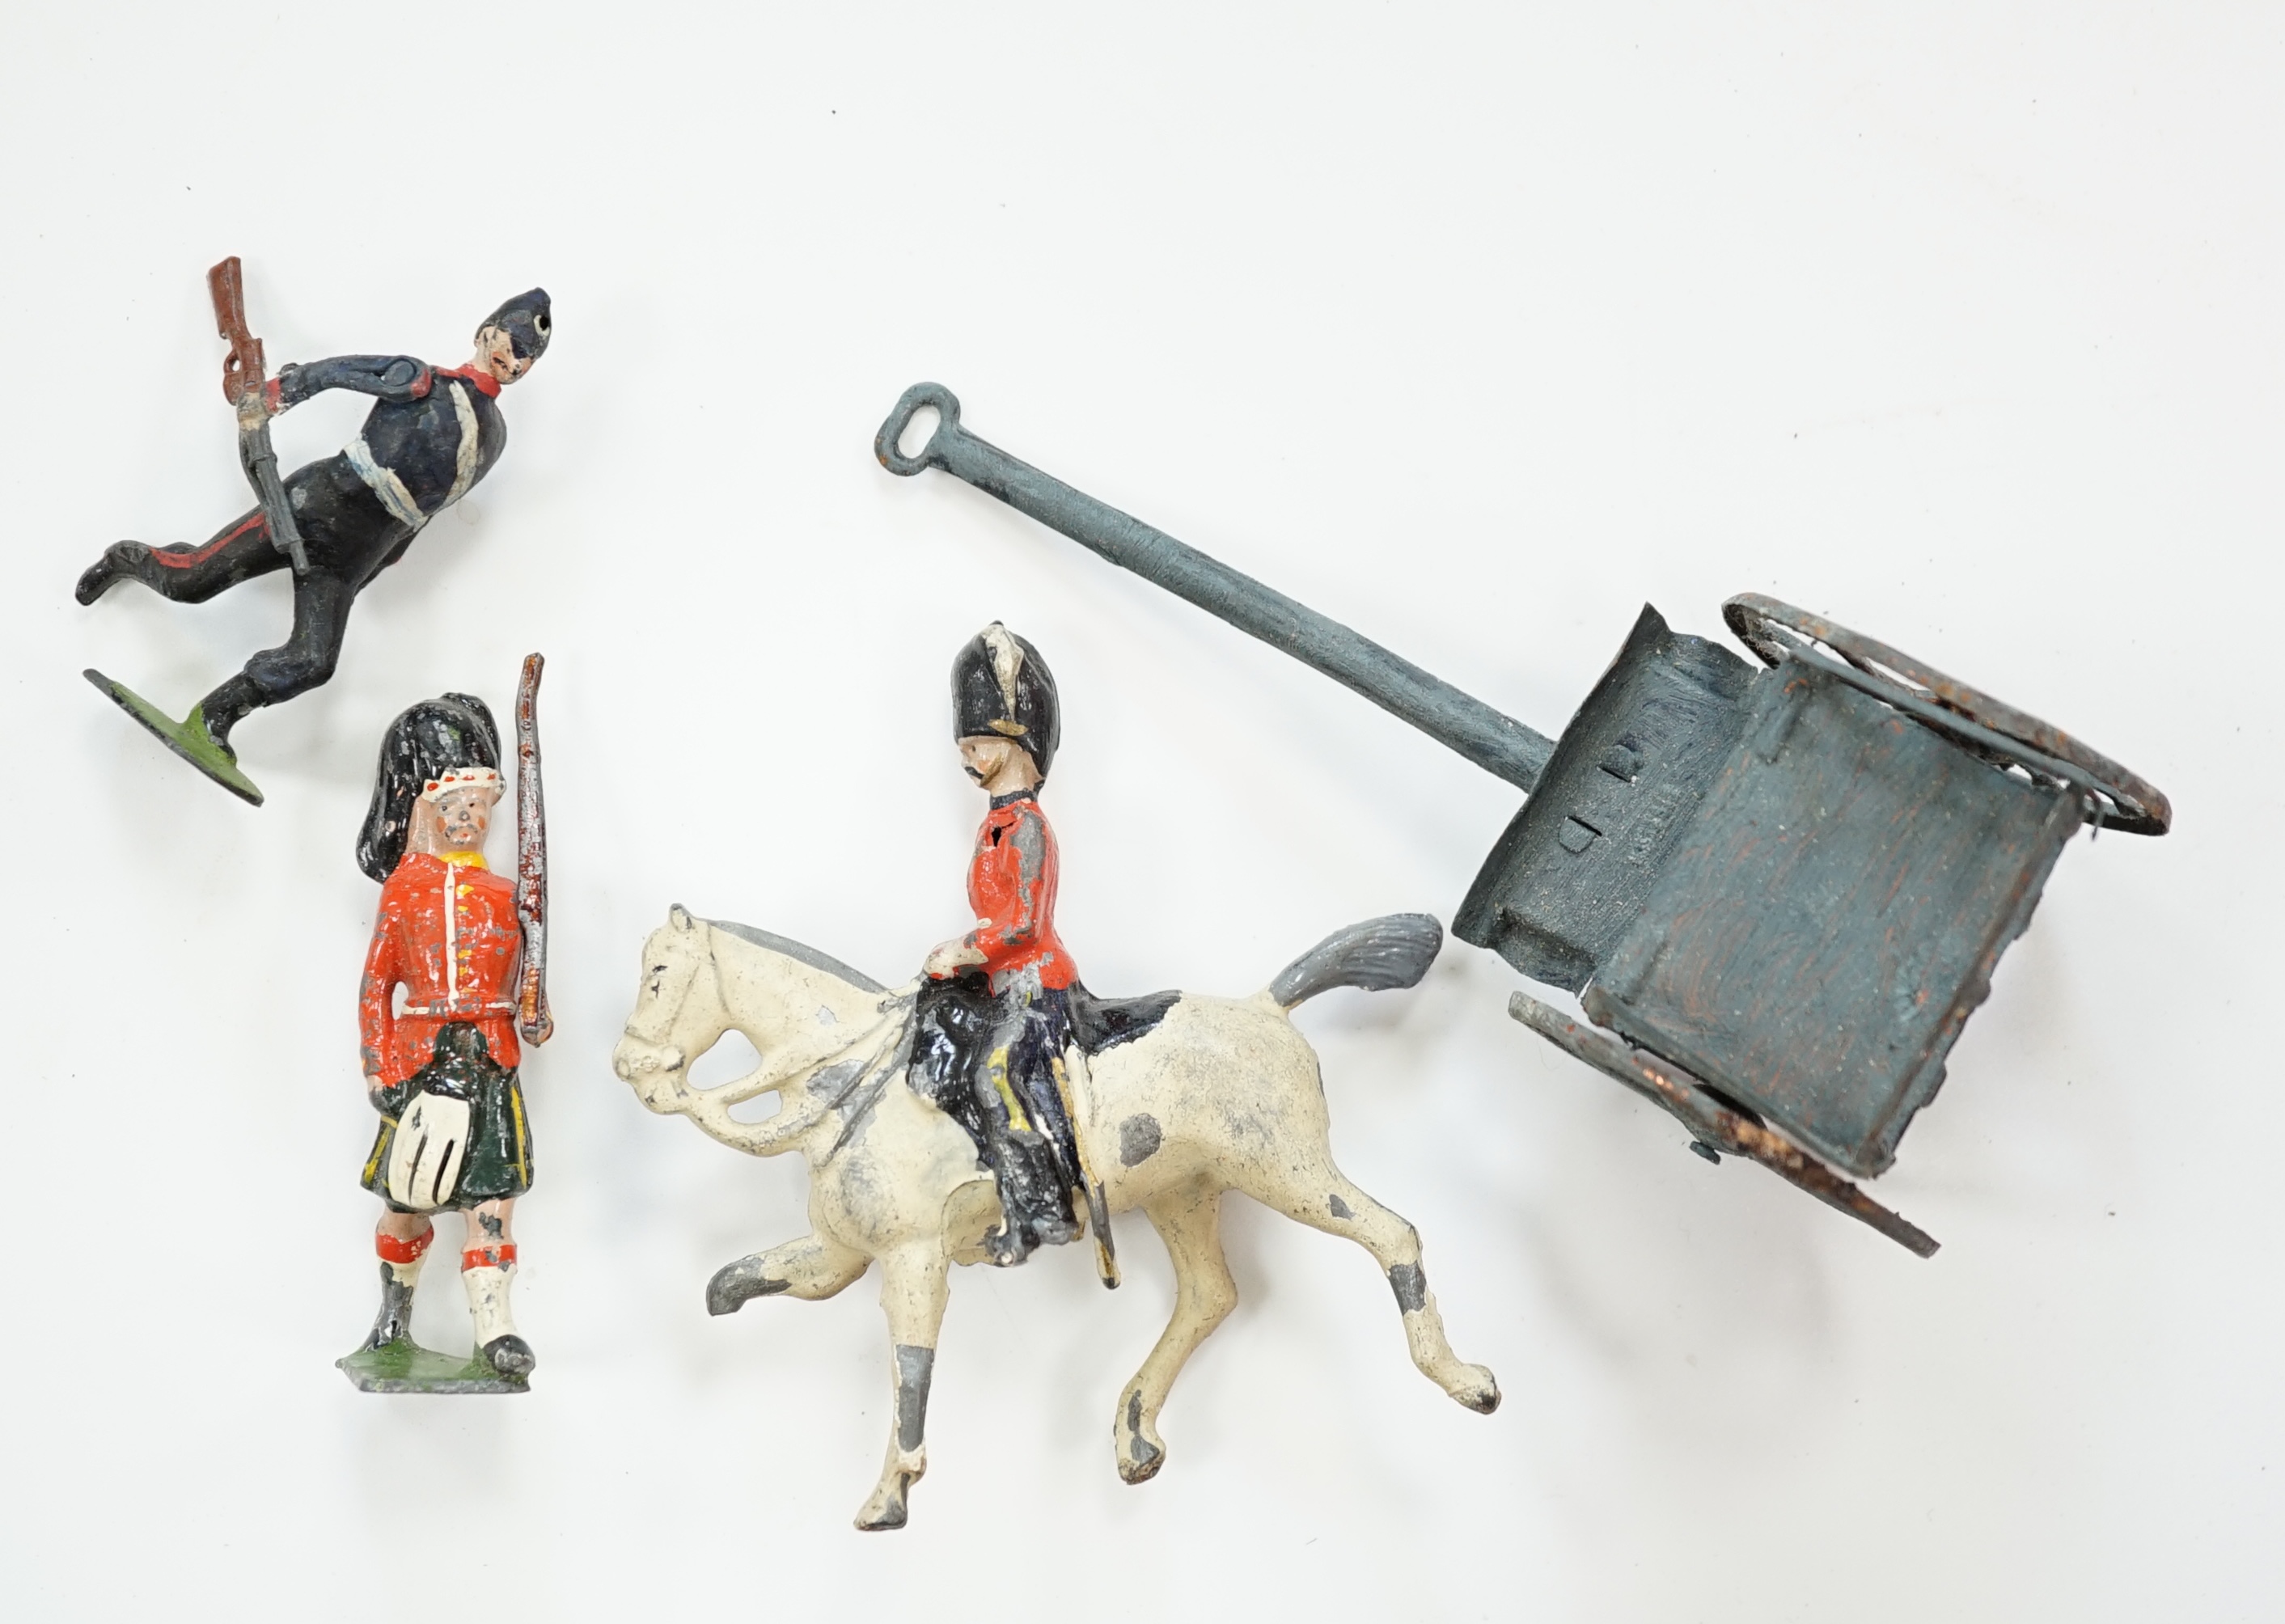 Forty-four early twentieth century Britains, etc. cavalry and infantry soldiers including; Scots Guards, mounted Grenadier Guards, bandsmen, etc. together with a field gun and tinplate lumber